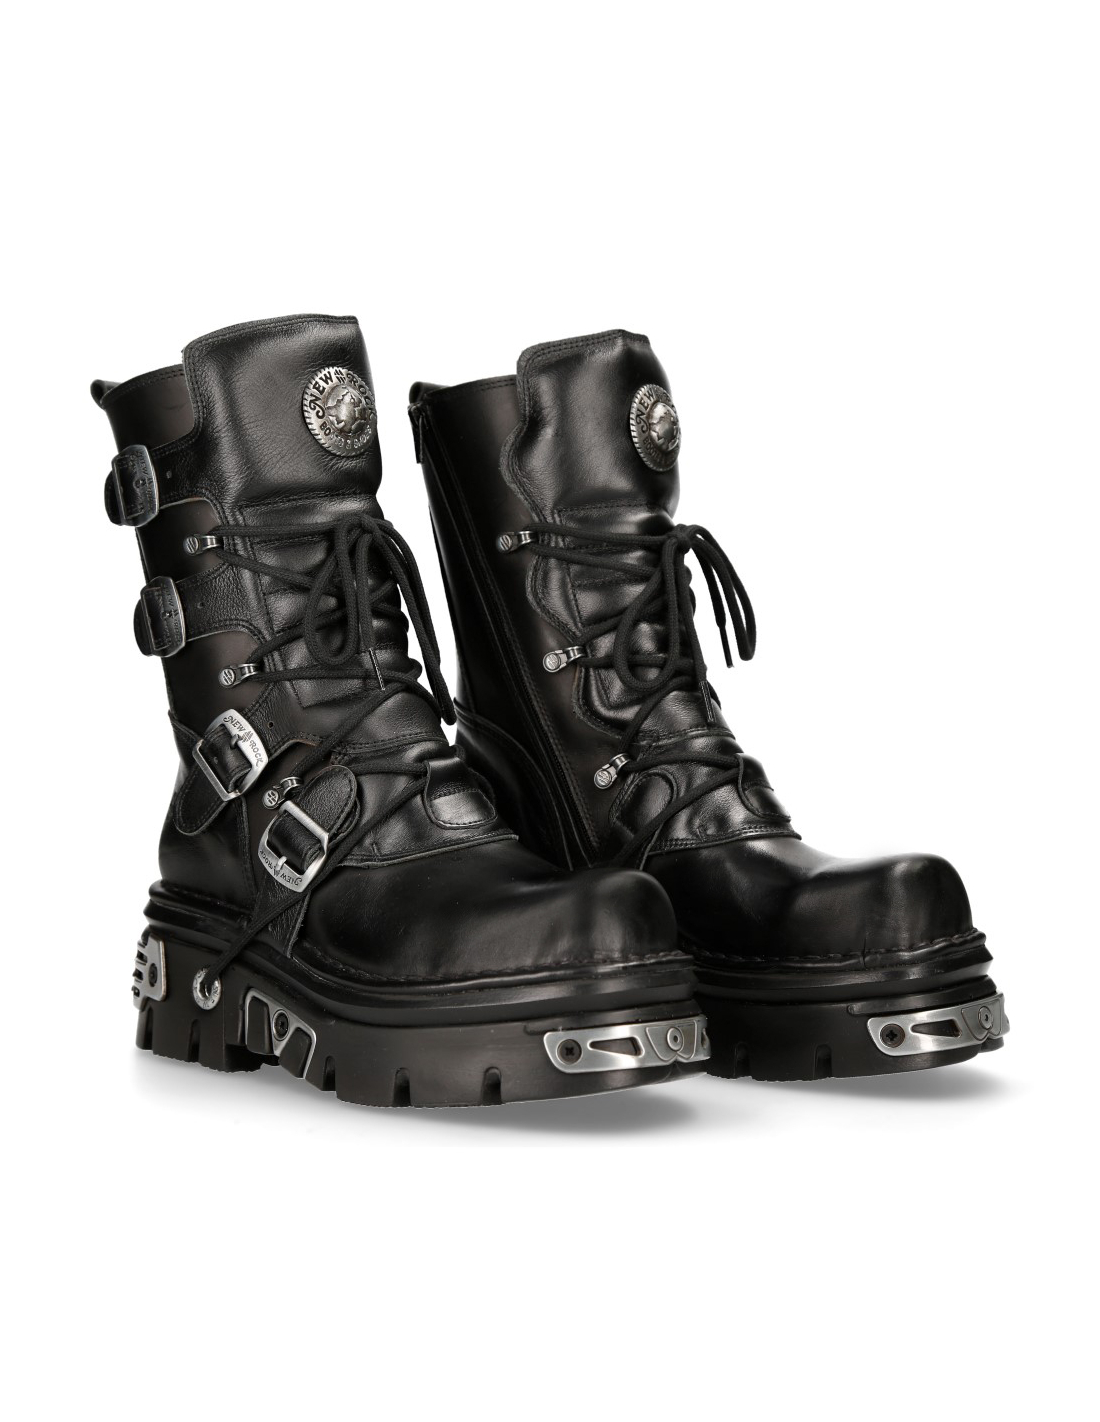 BOOT BLACK REACTOR WITH LACES M-373-S4